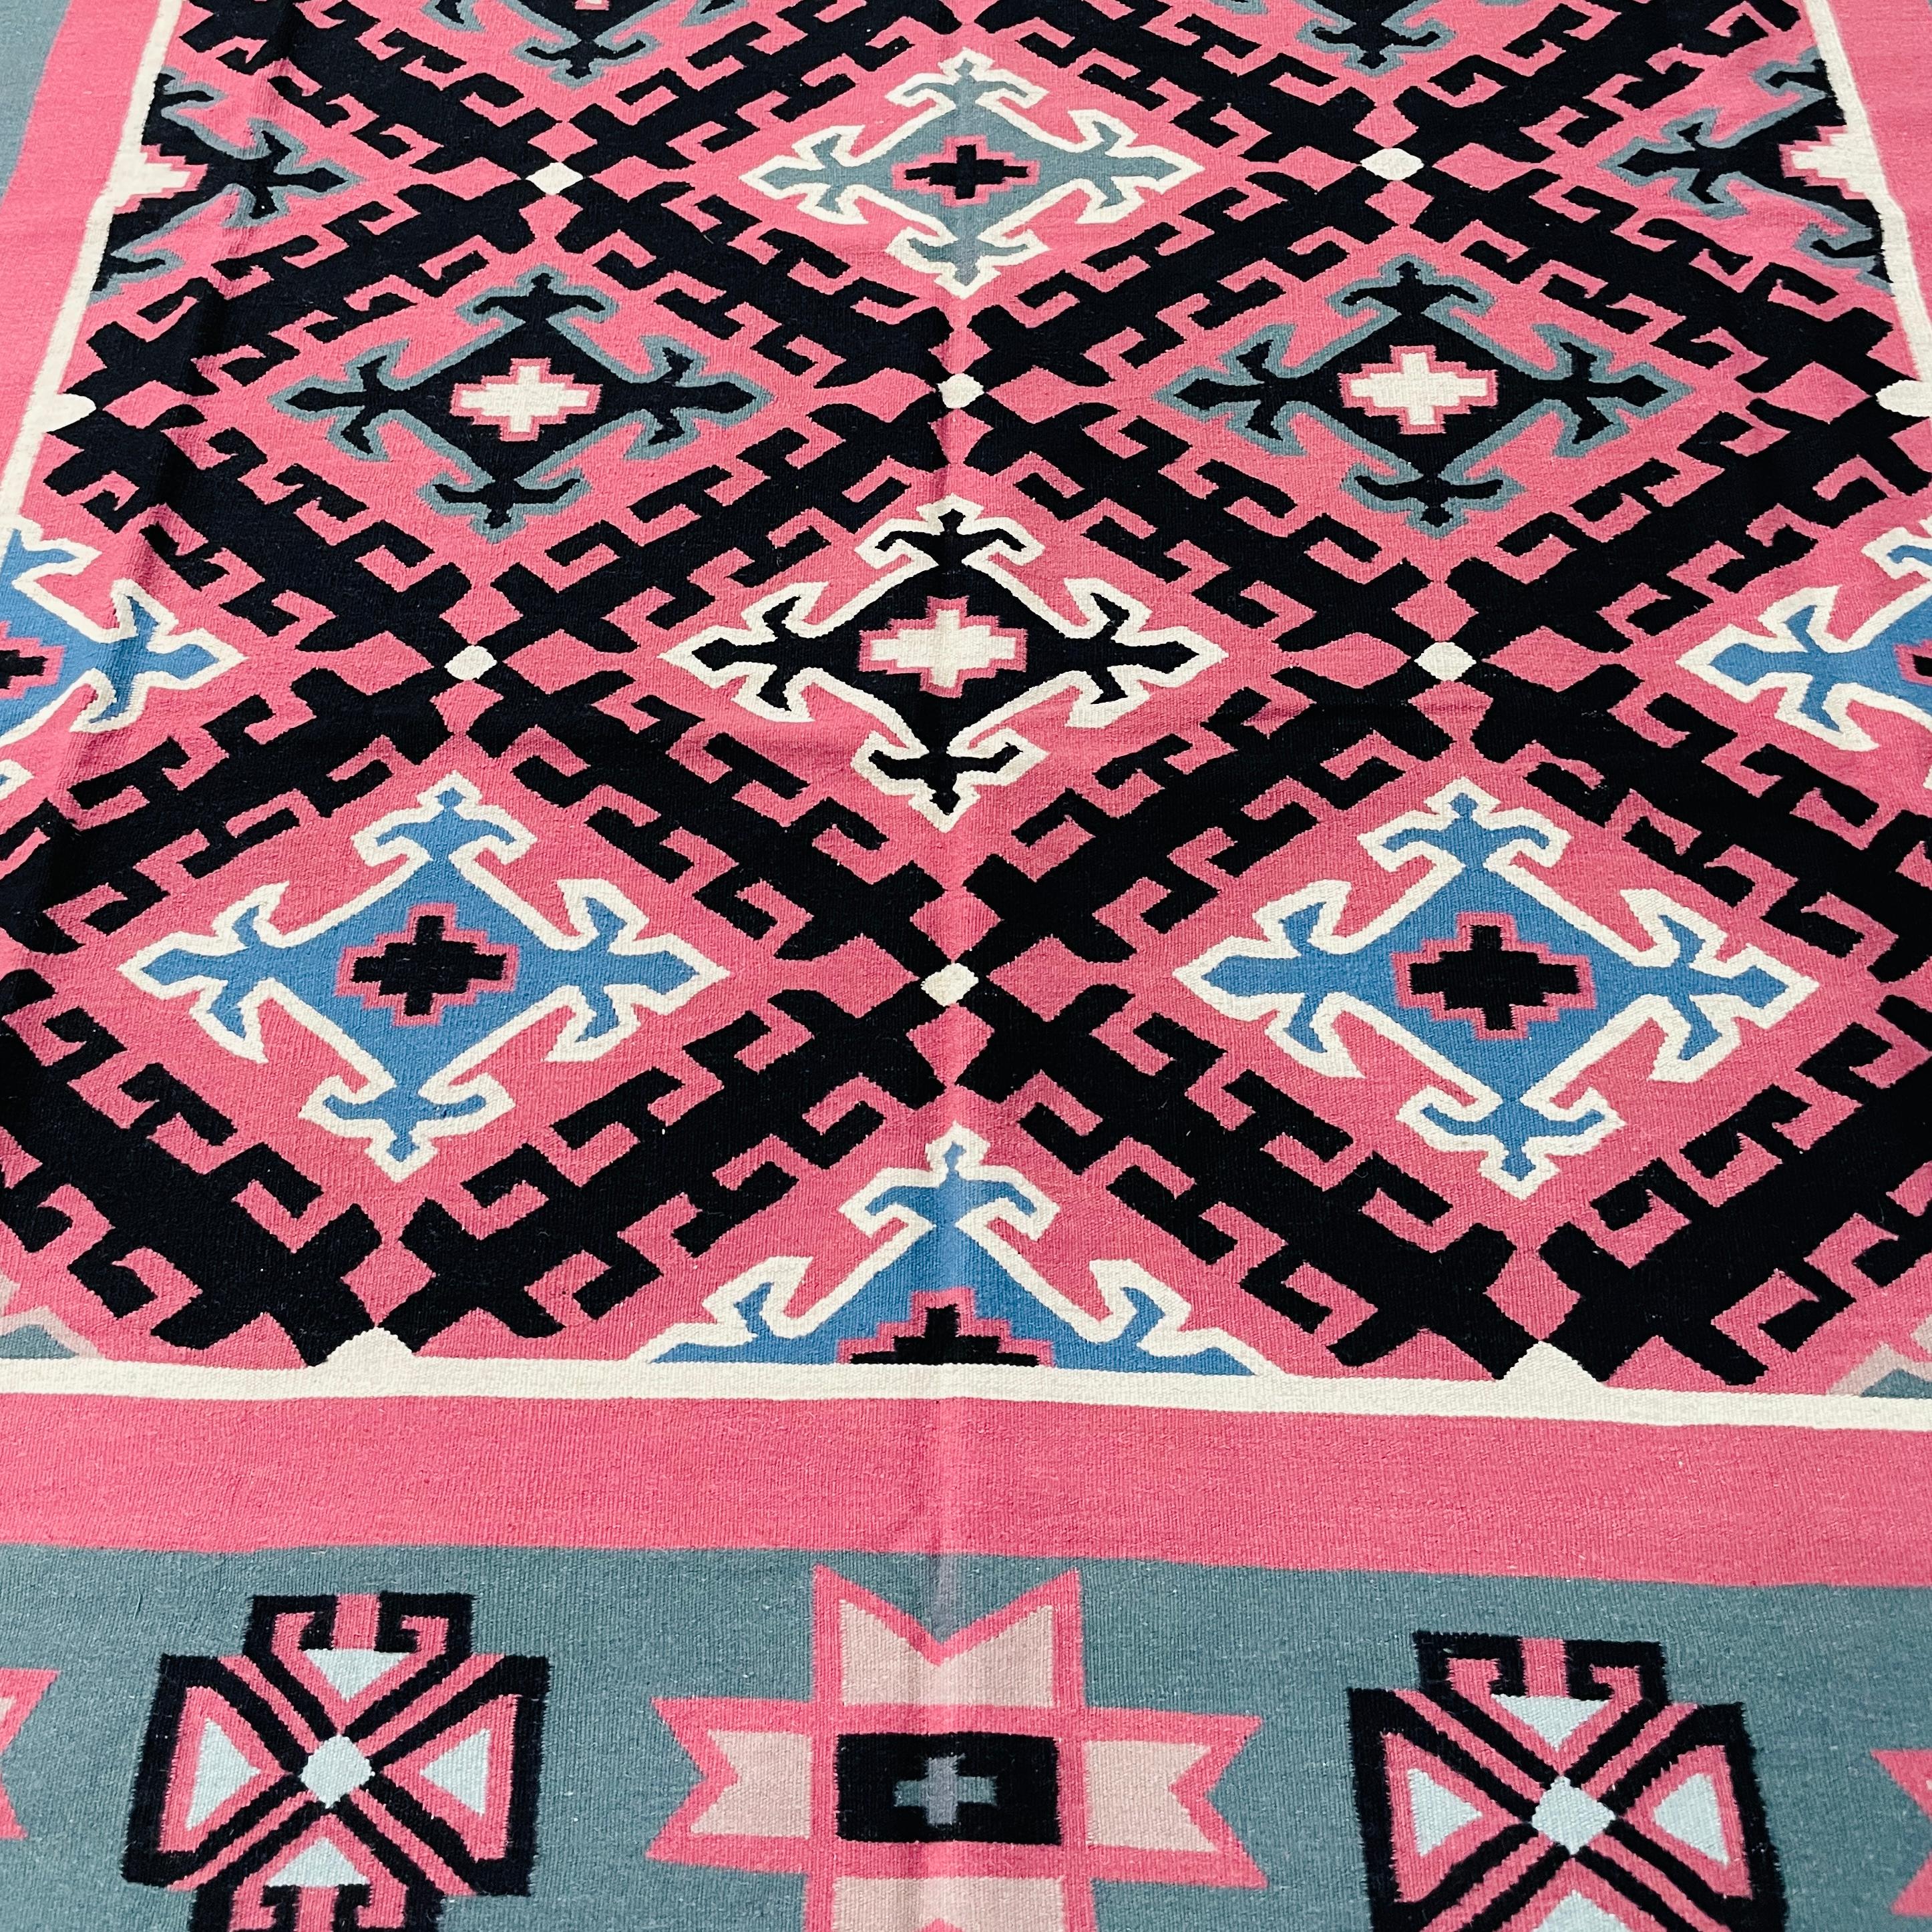 8' x 10' Chinese Kilim Rug In Good Condition For Sale In Dallas, TX